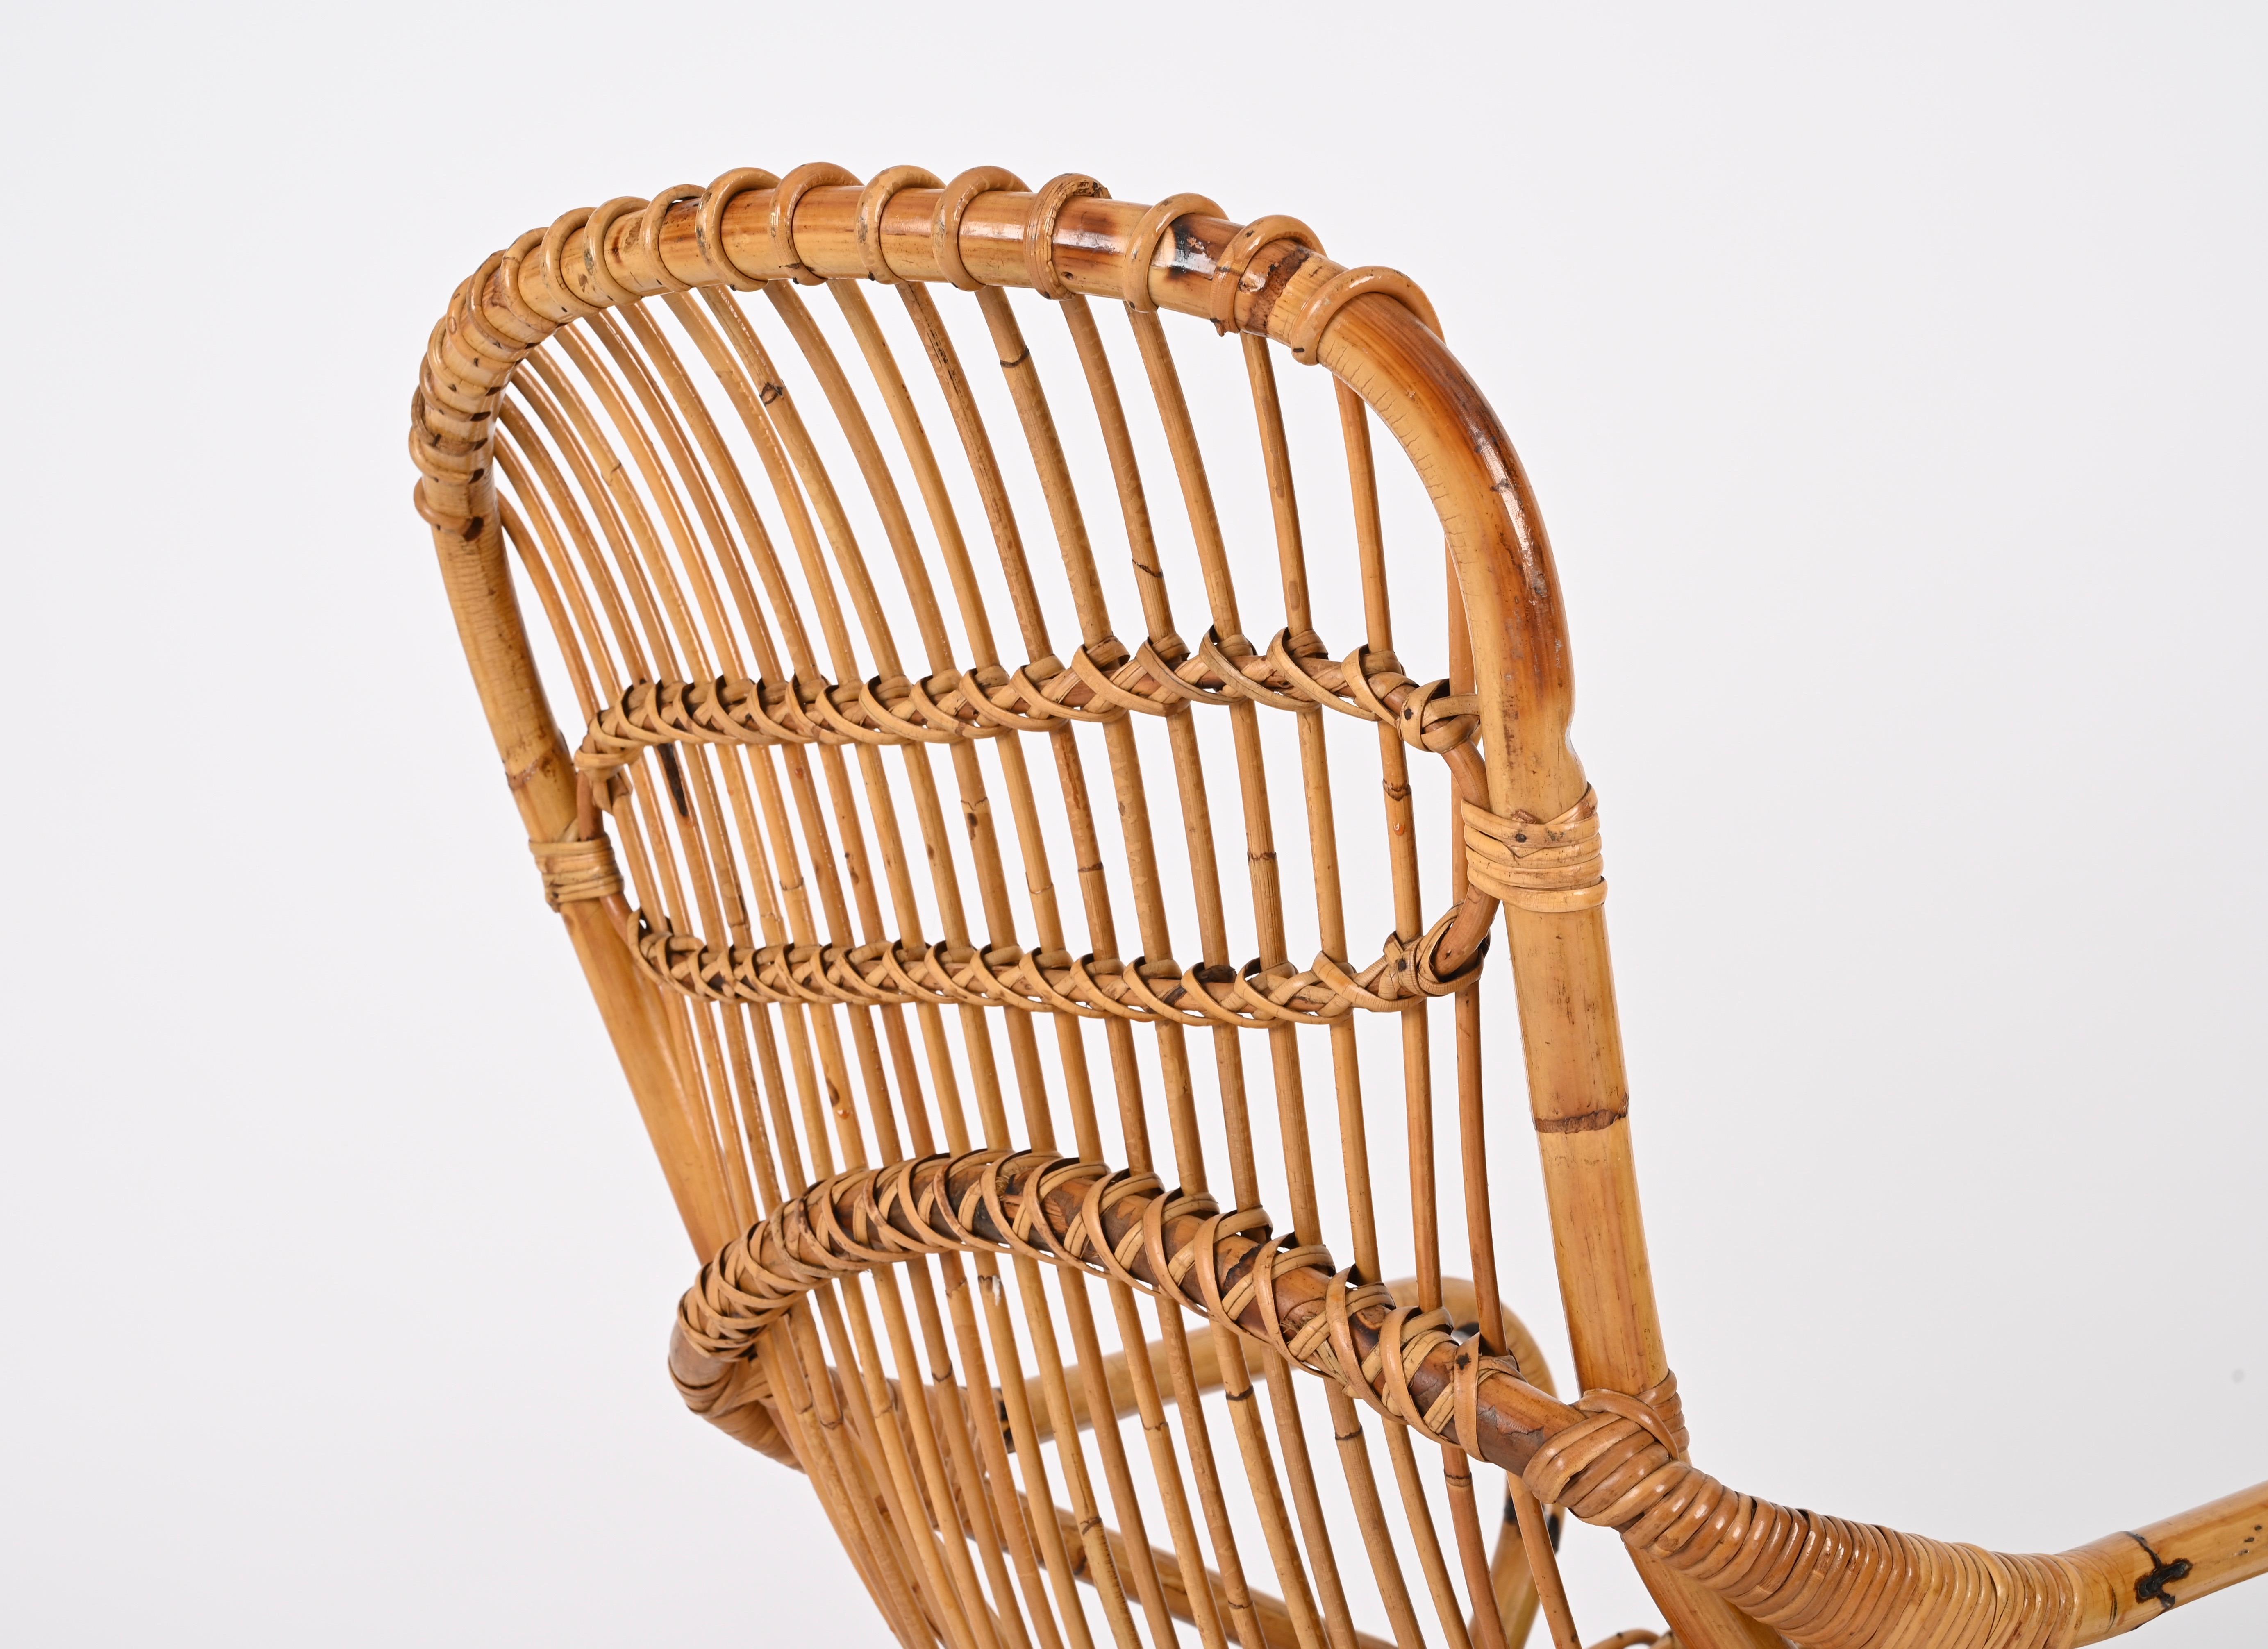 Bamboo Pair of Midcentury Italian Wicker and Rattan Armchairs by Tito Agnoli, 1960s For Sale